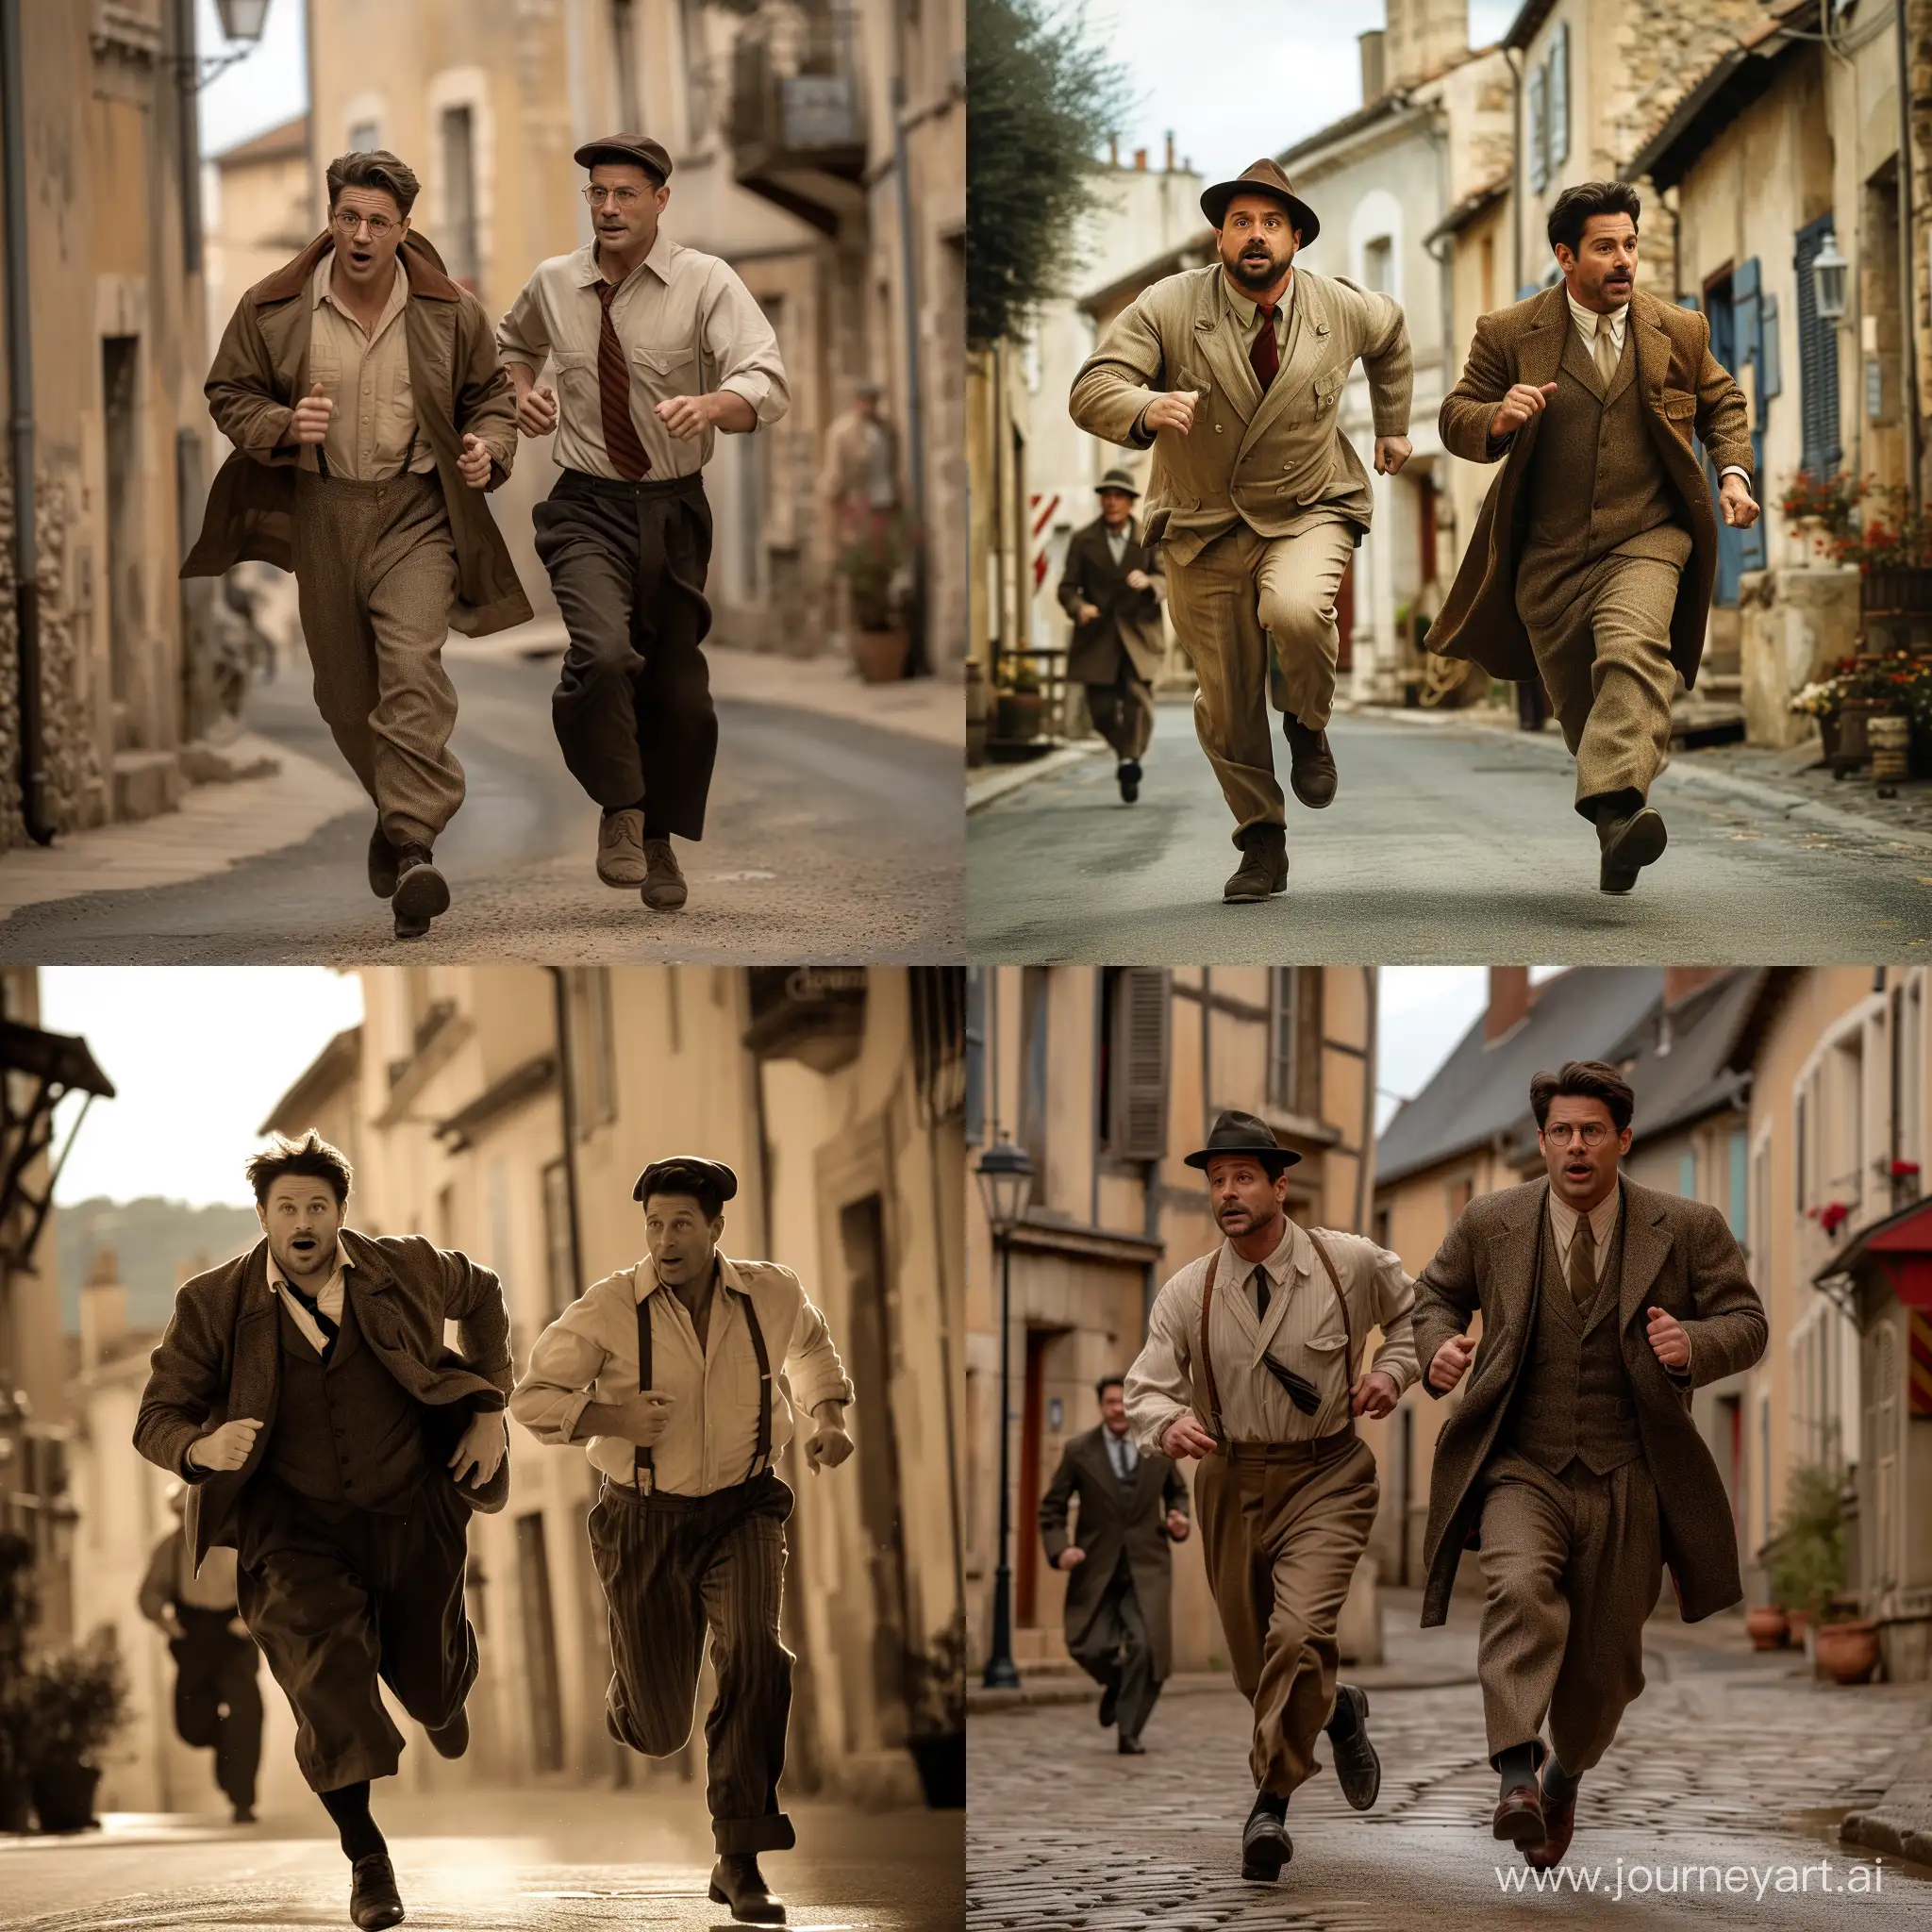 Seth Rogan in 1940s french attire, old picture quality, running alongside brad pit through the town's streets